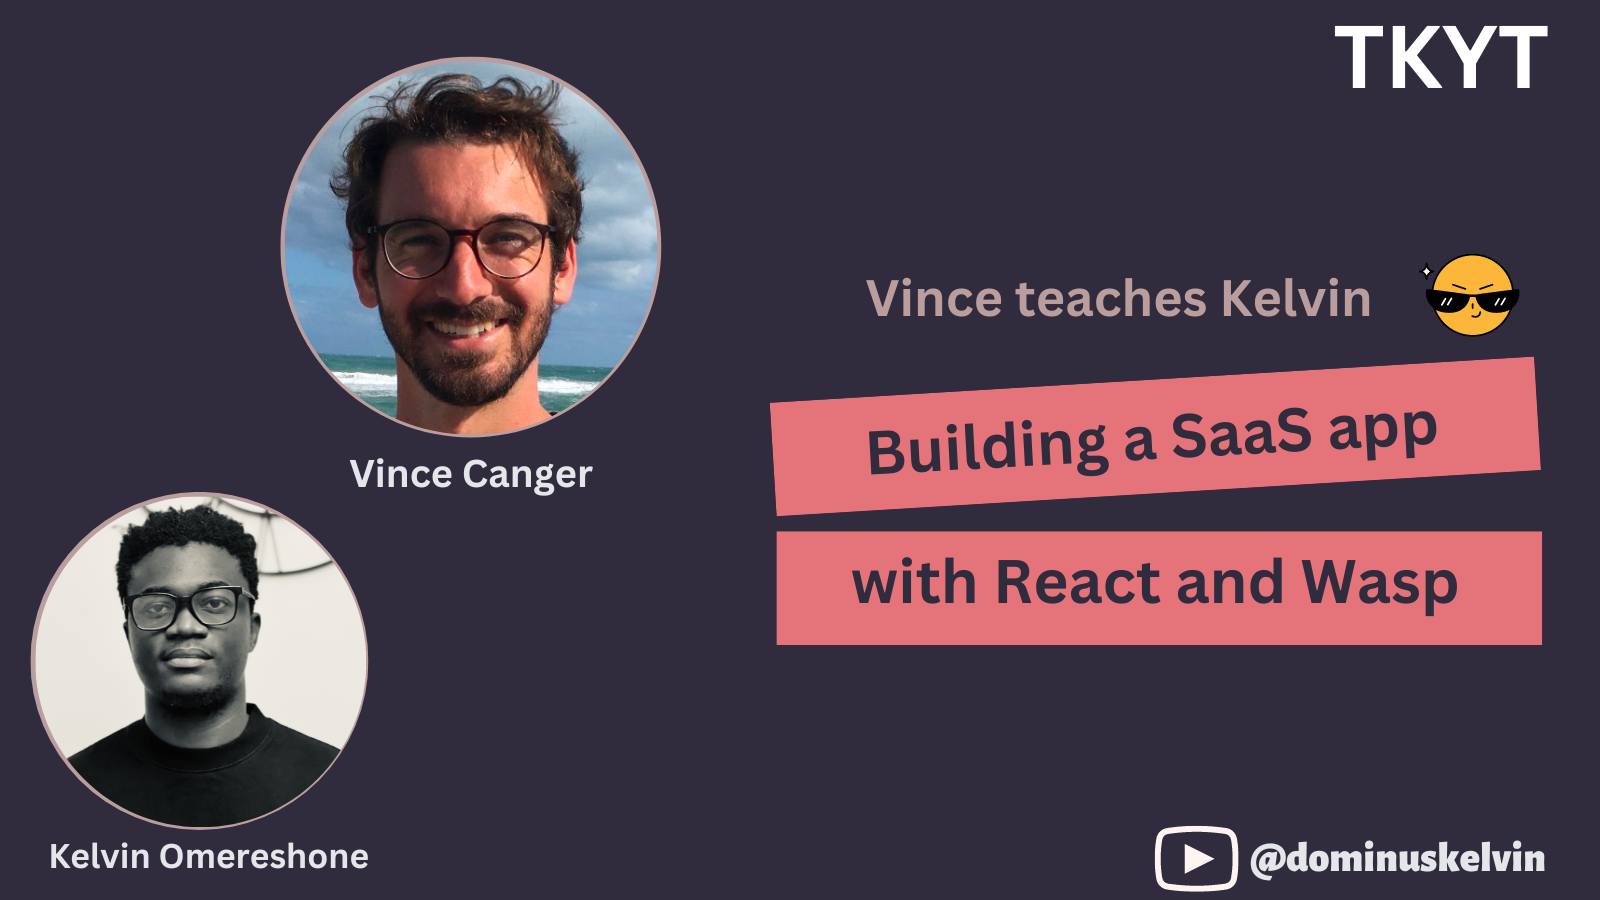 Build a SaaS app with React and Wasp